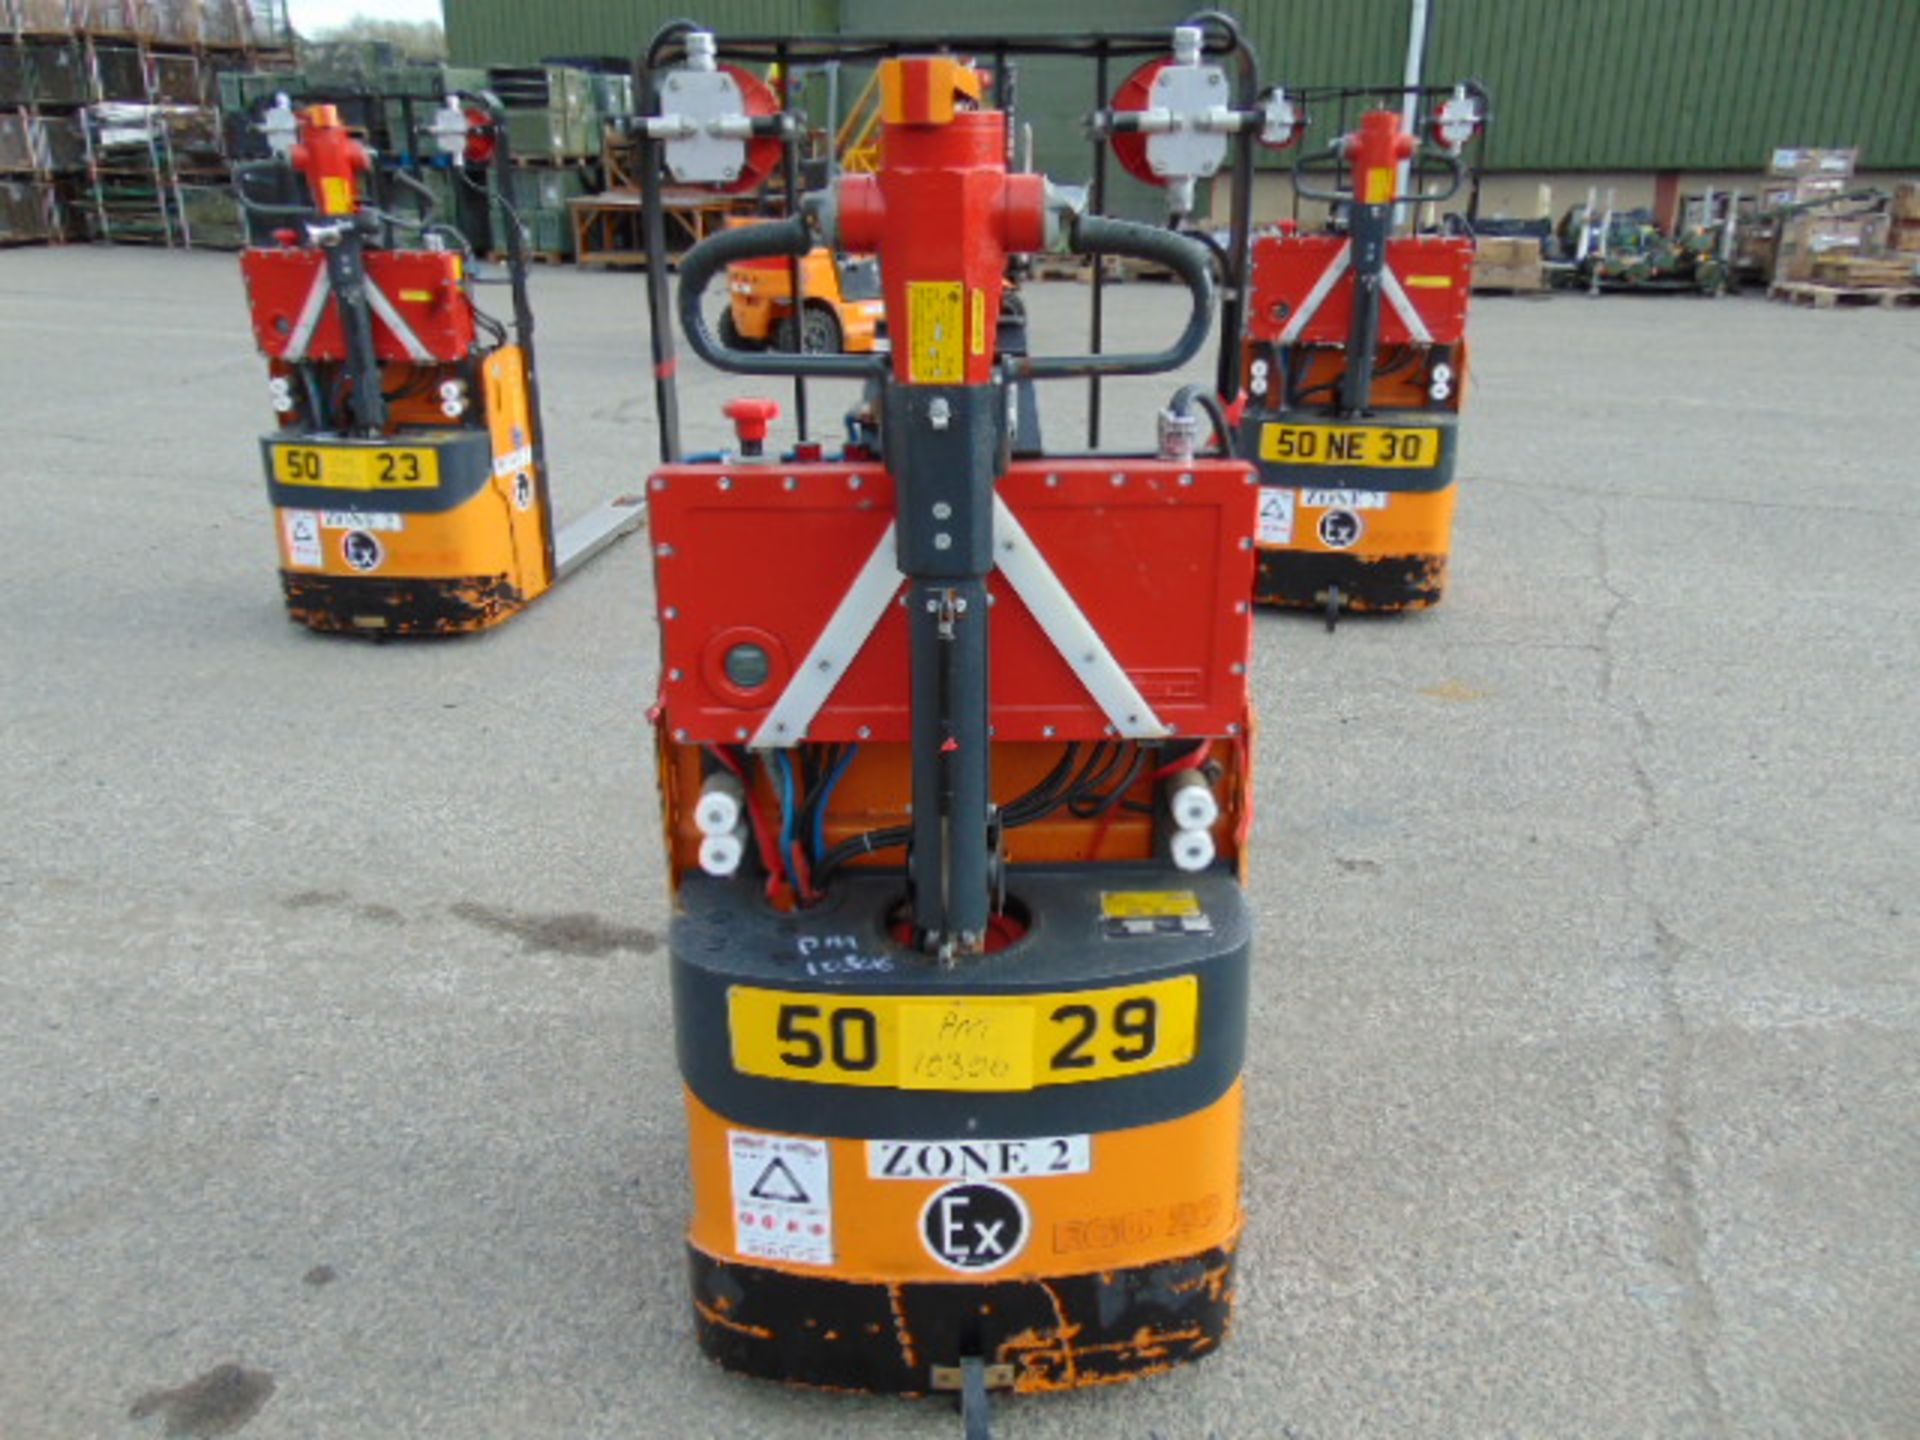 Still EGU 20 Class C, Zone 2 Protected Electric Powered Pallet Truck - Image 4 of 8